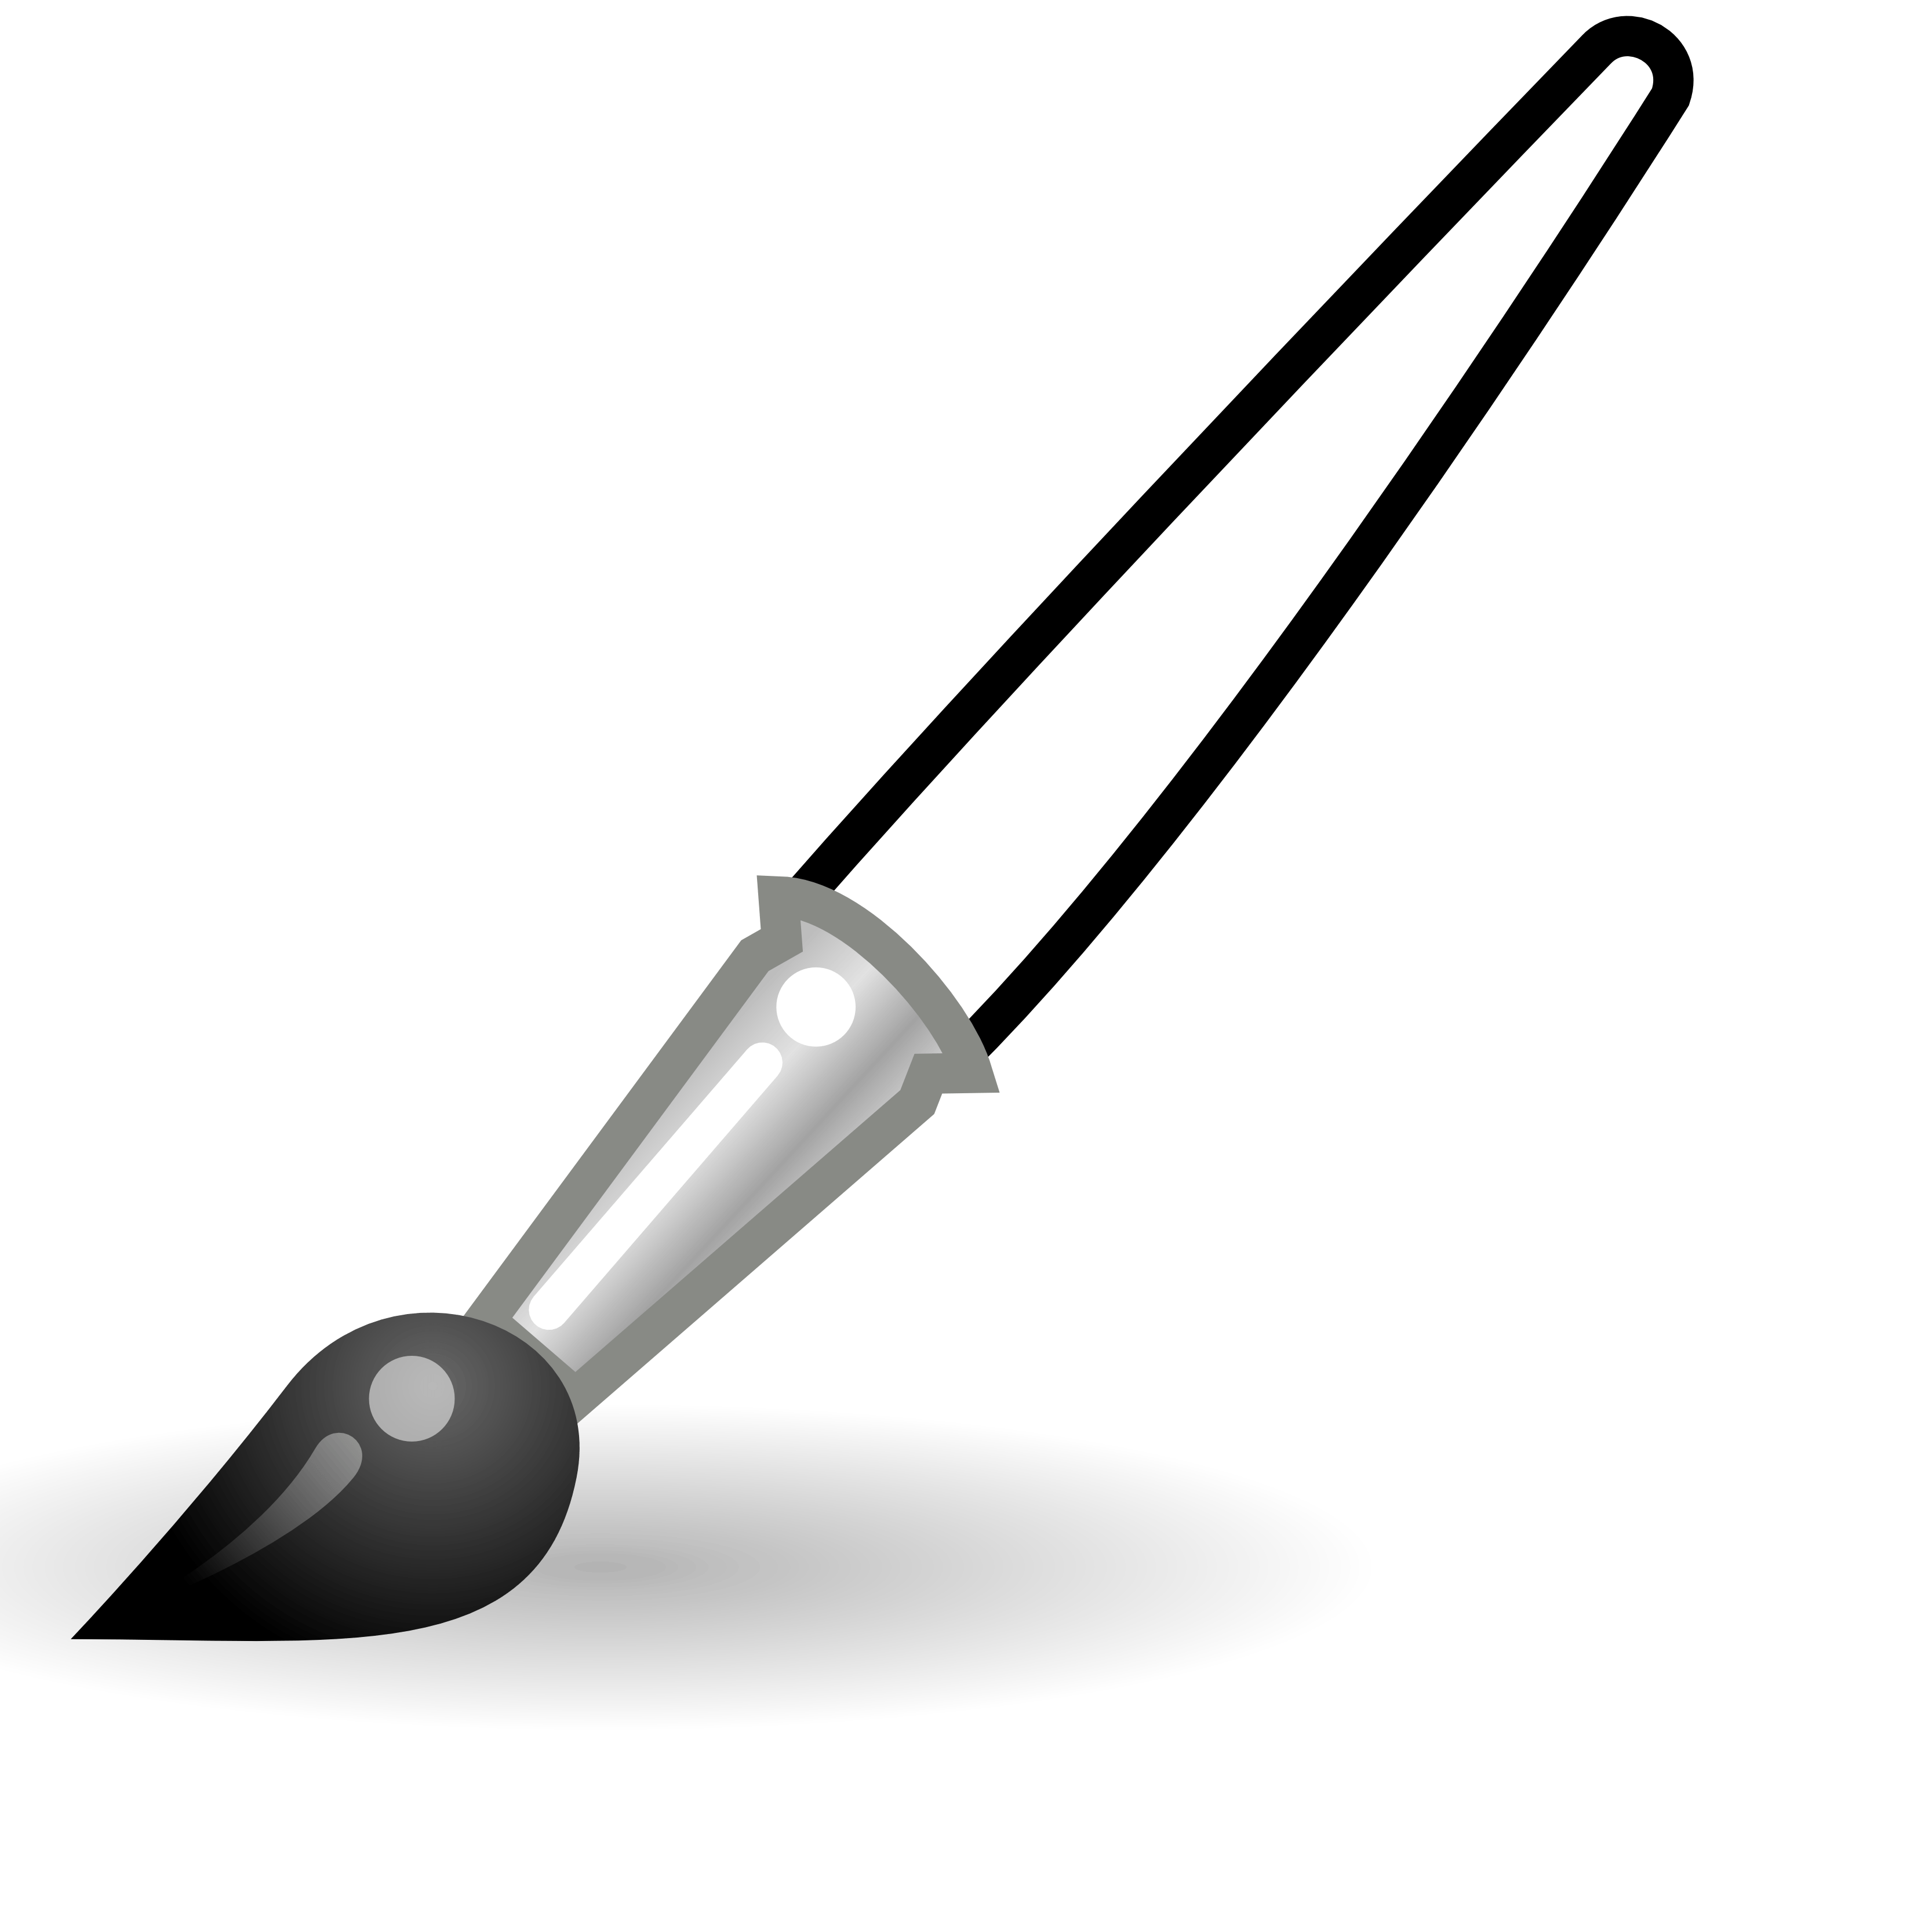 Paintbrush Black And White Clipart